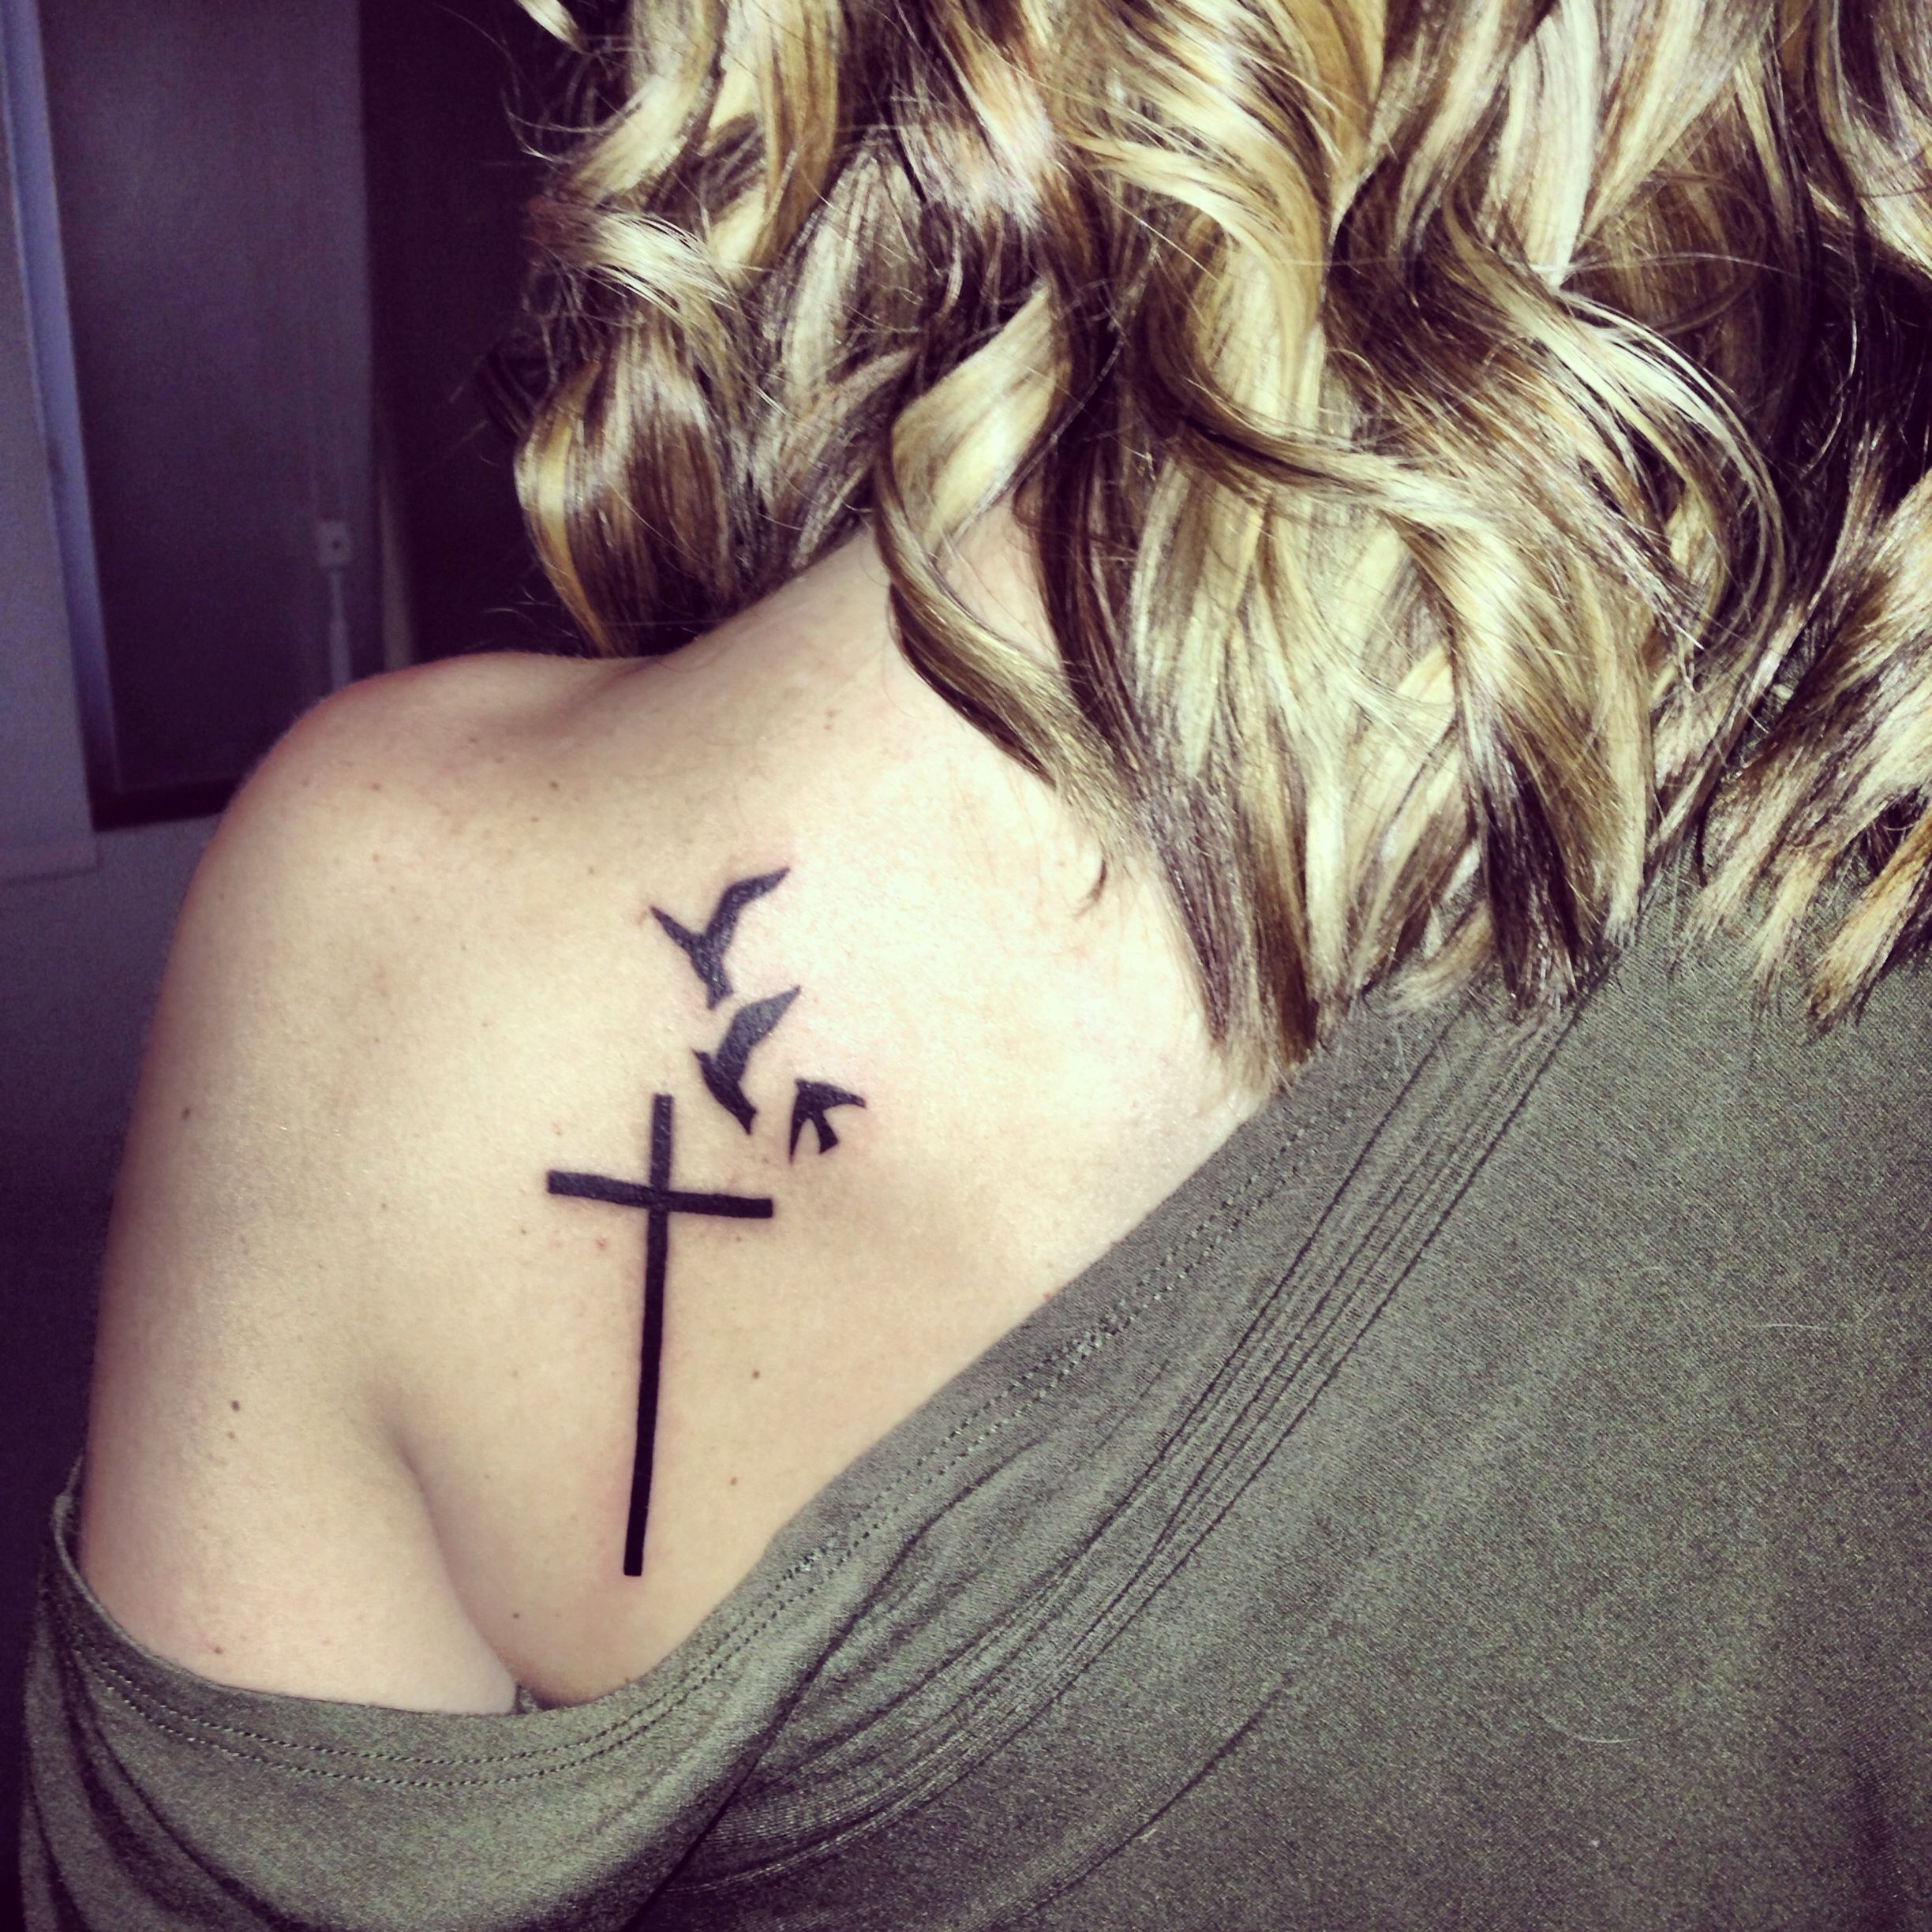 Birds Cross Tattoo Meaningful Tattoospiercings Cross Tattoo intended for dimensions 2448 X 2448